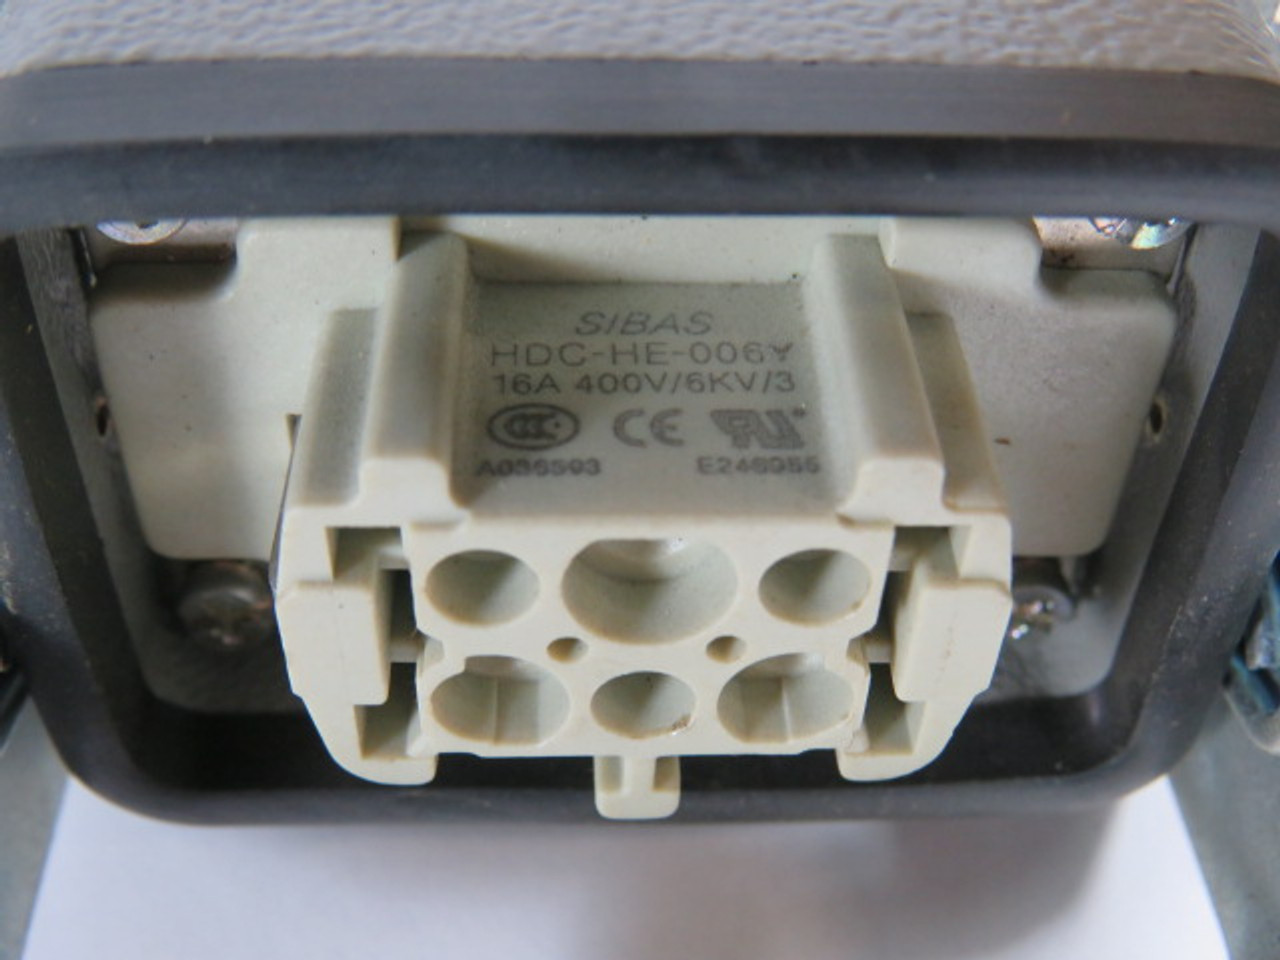 Sibas HDC-HE-006Y Connector 16A 400V/6KV/3 USED